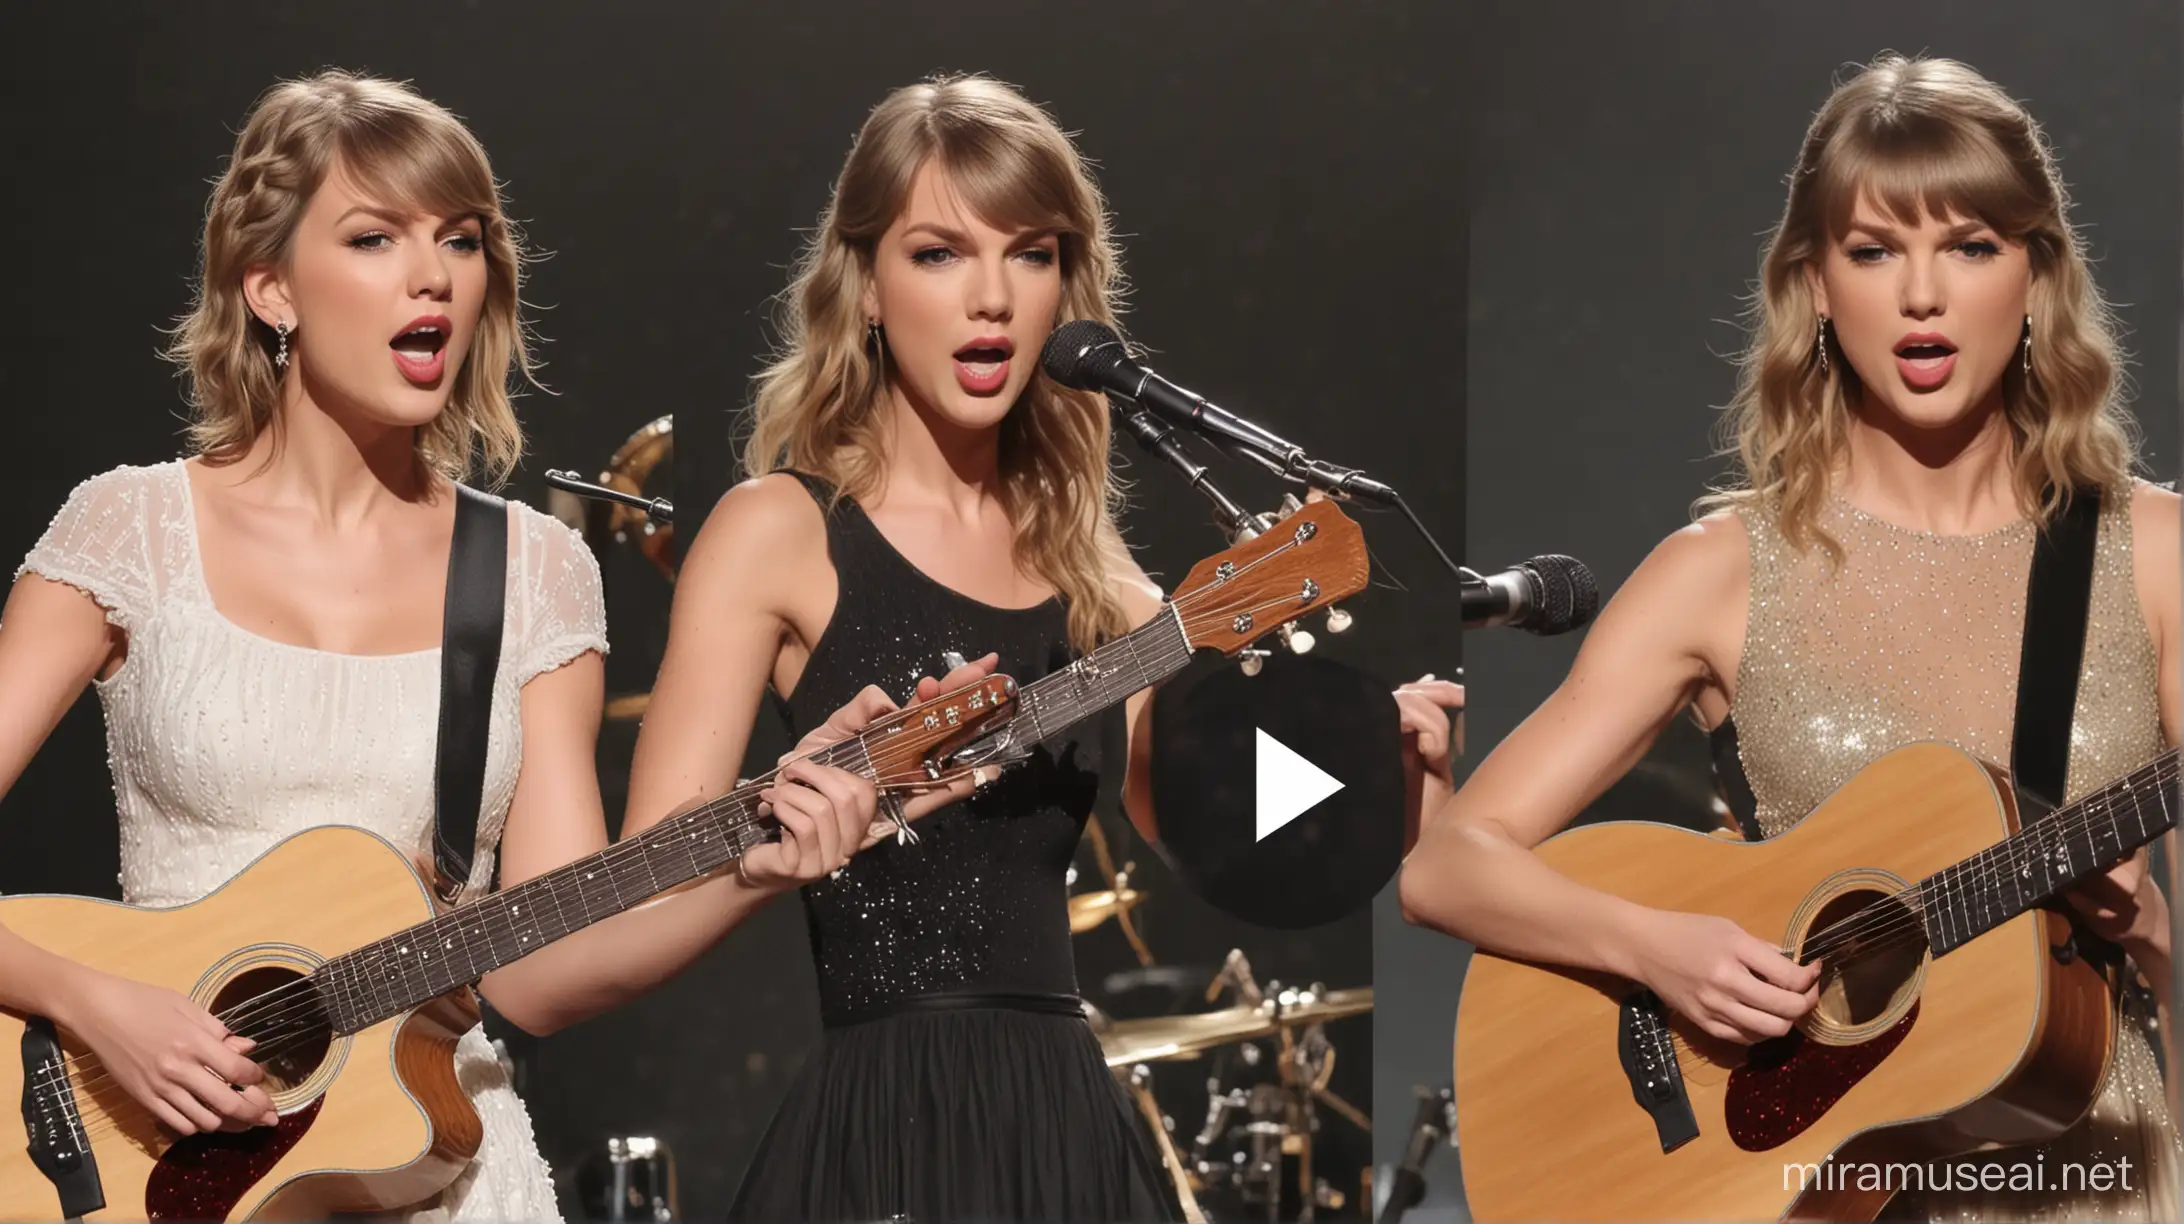 A  side by side comparison of a person  playing many instruments and Taylor Swift singing.